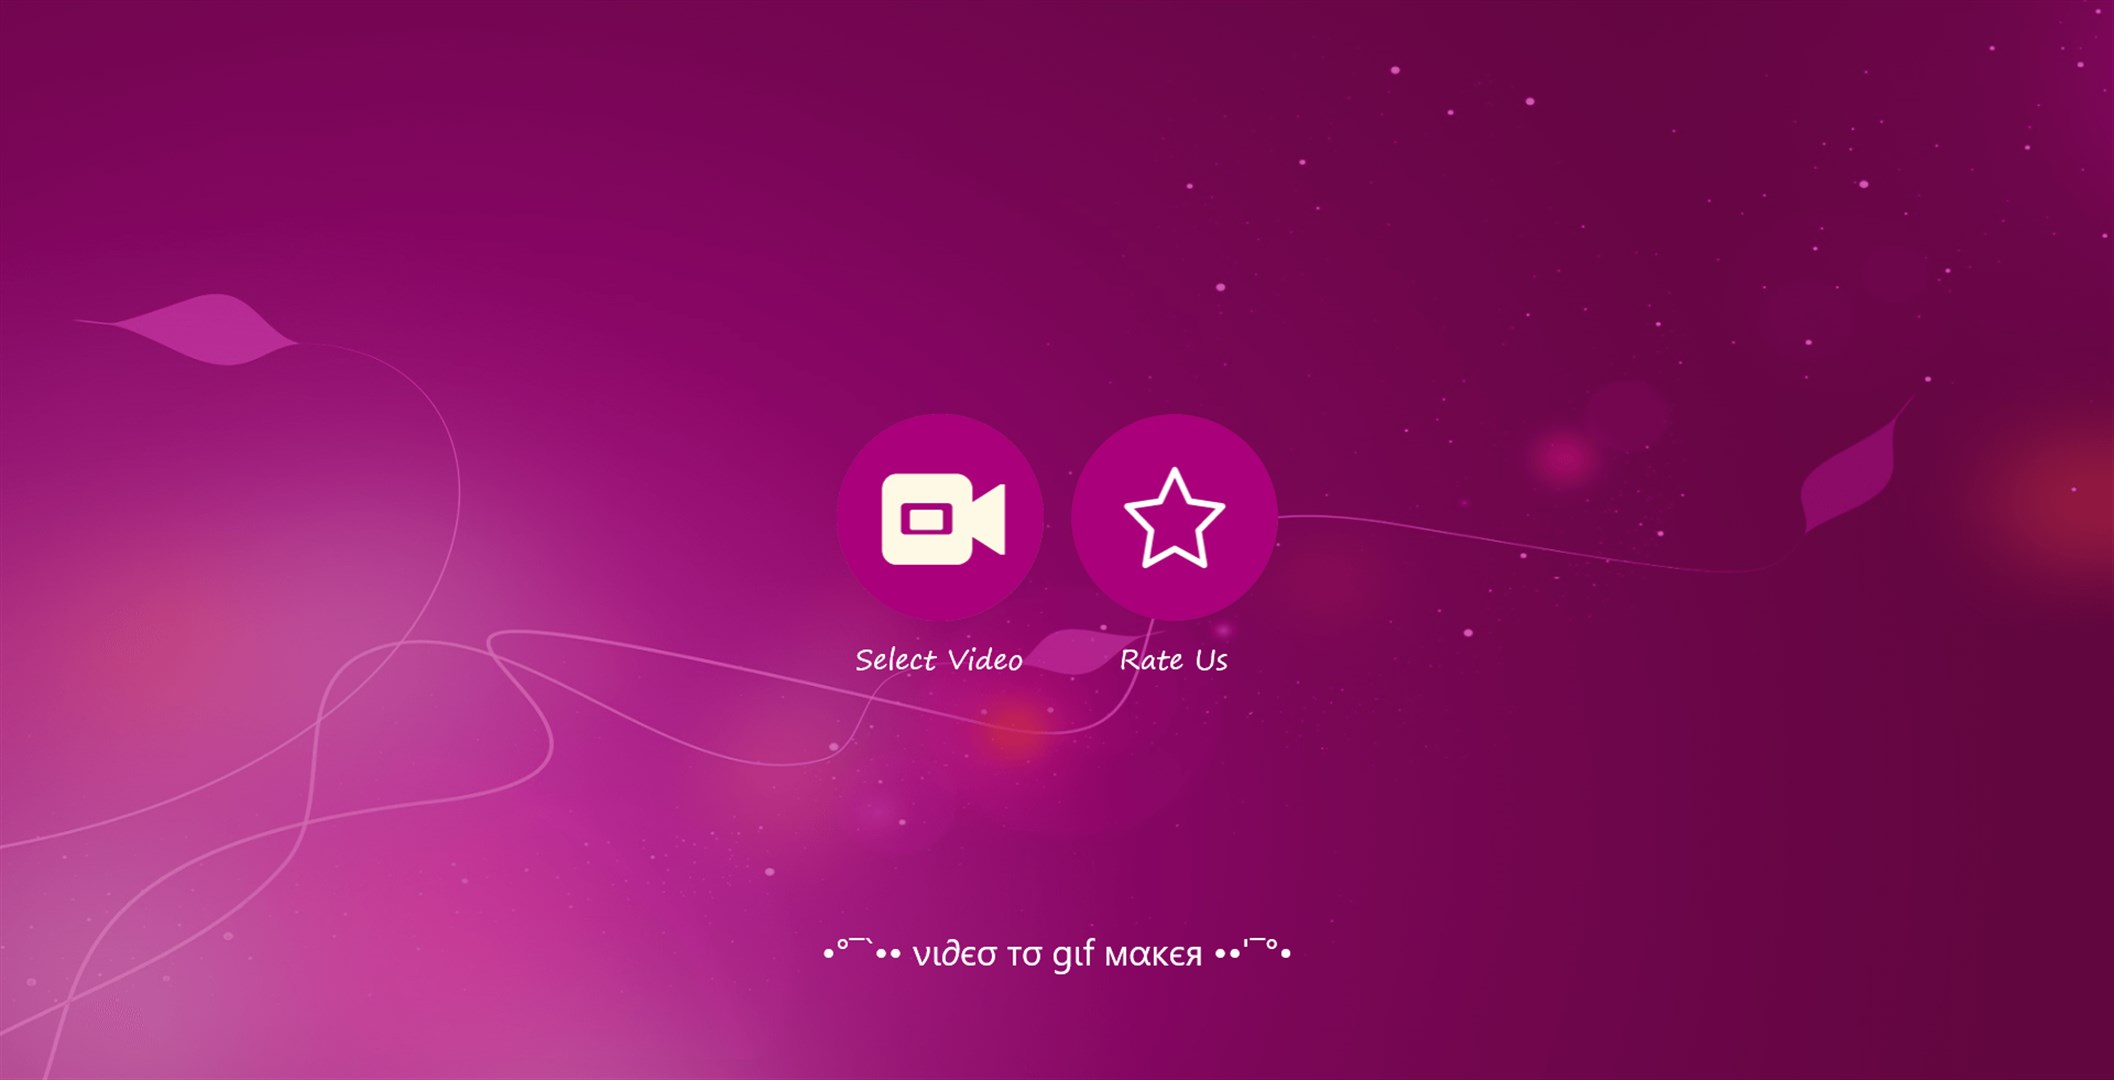 Video Making GIFs - Official app in the Microsoft Store